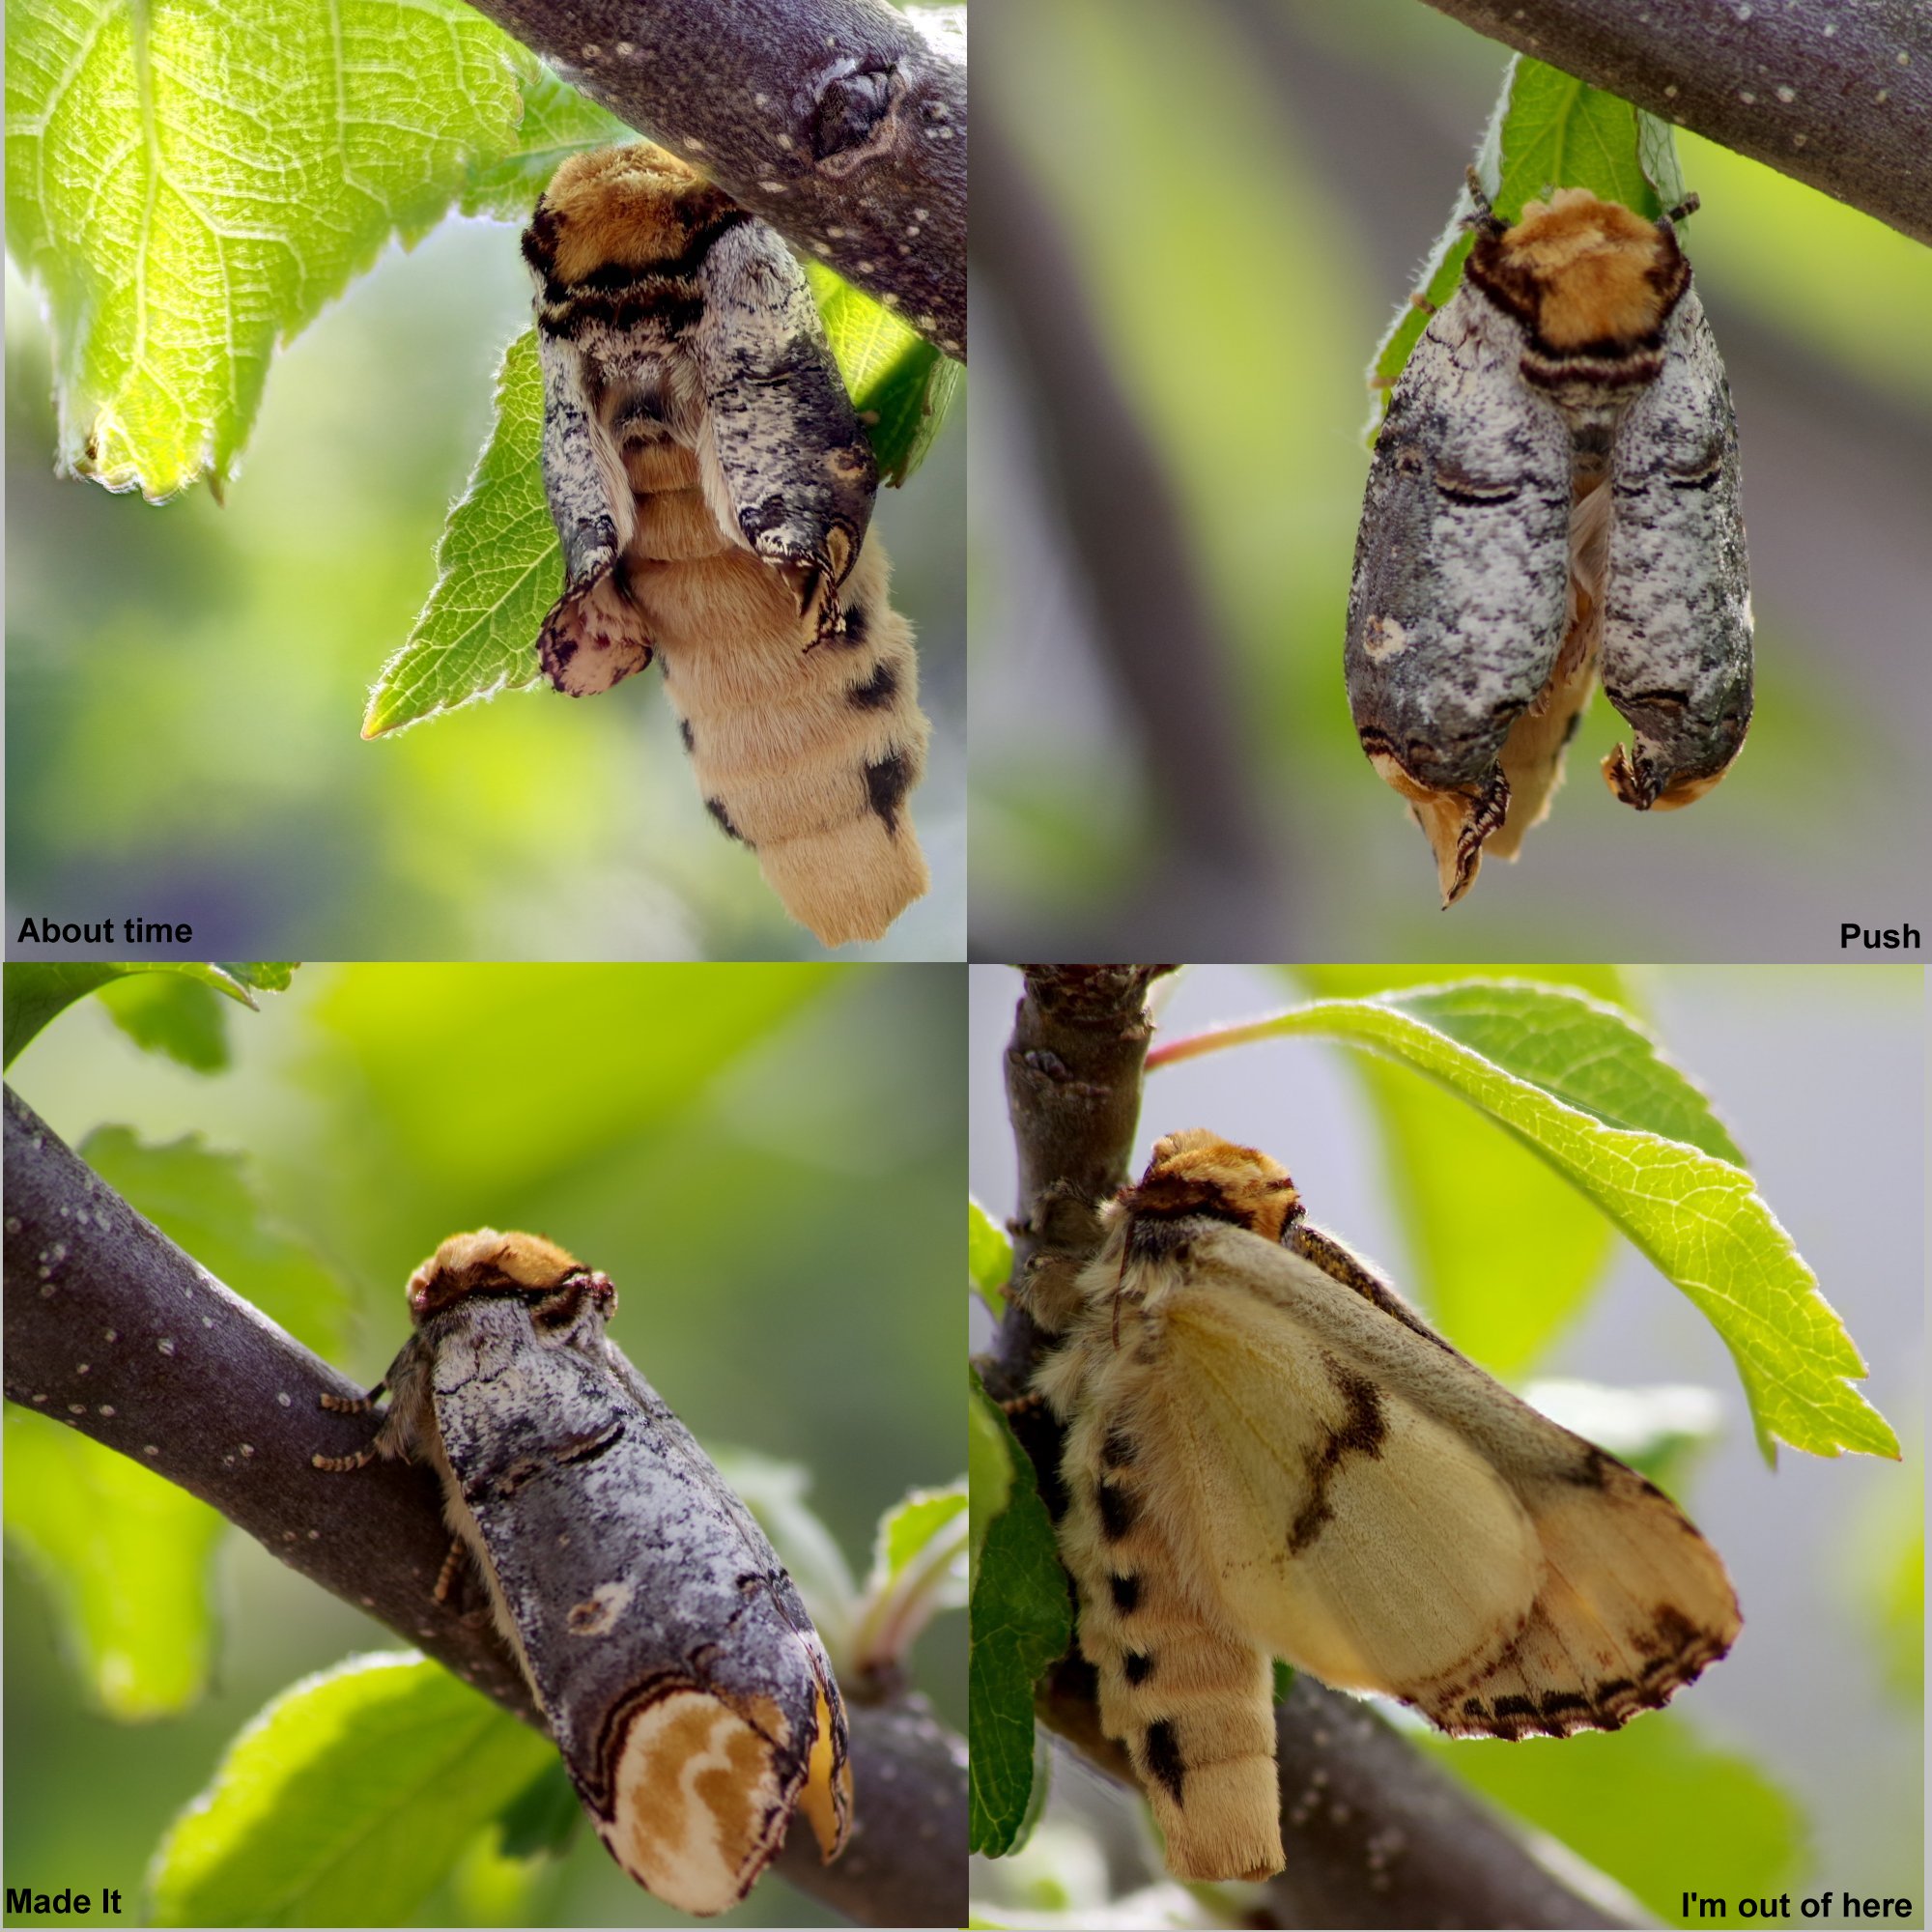 2x2 grid of photos of a moth emerging from its cocoon